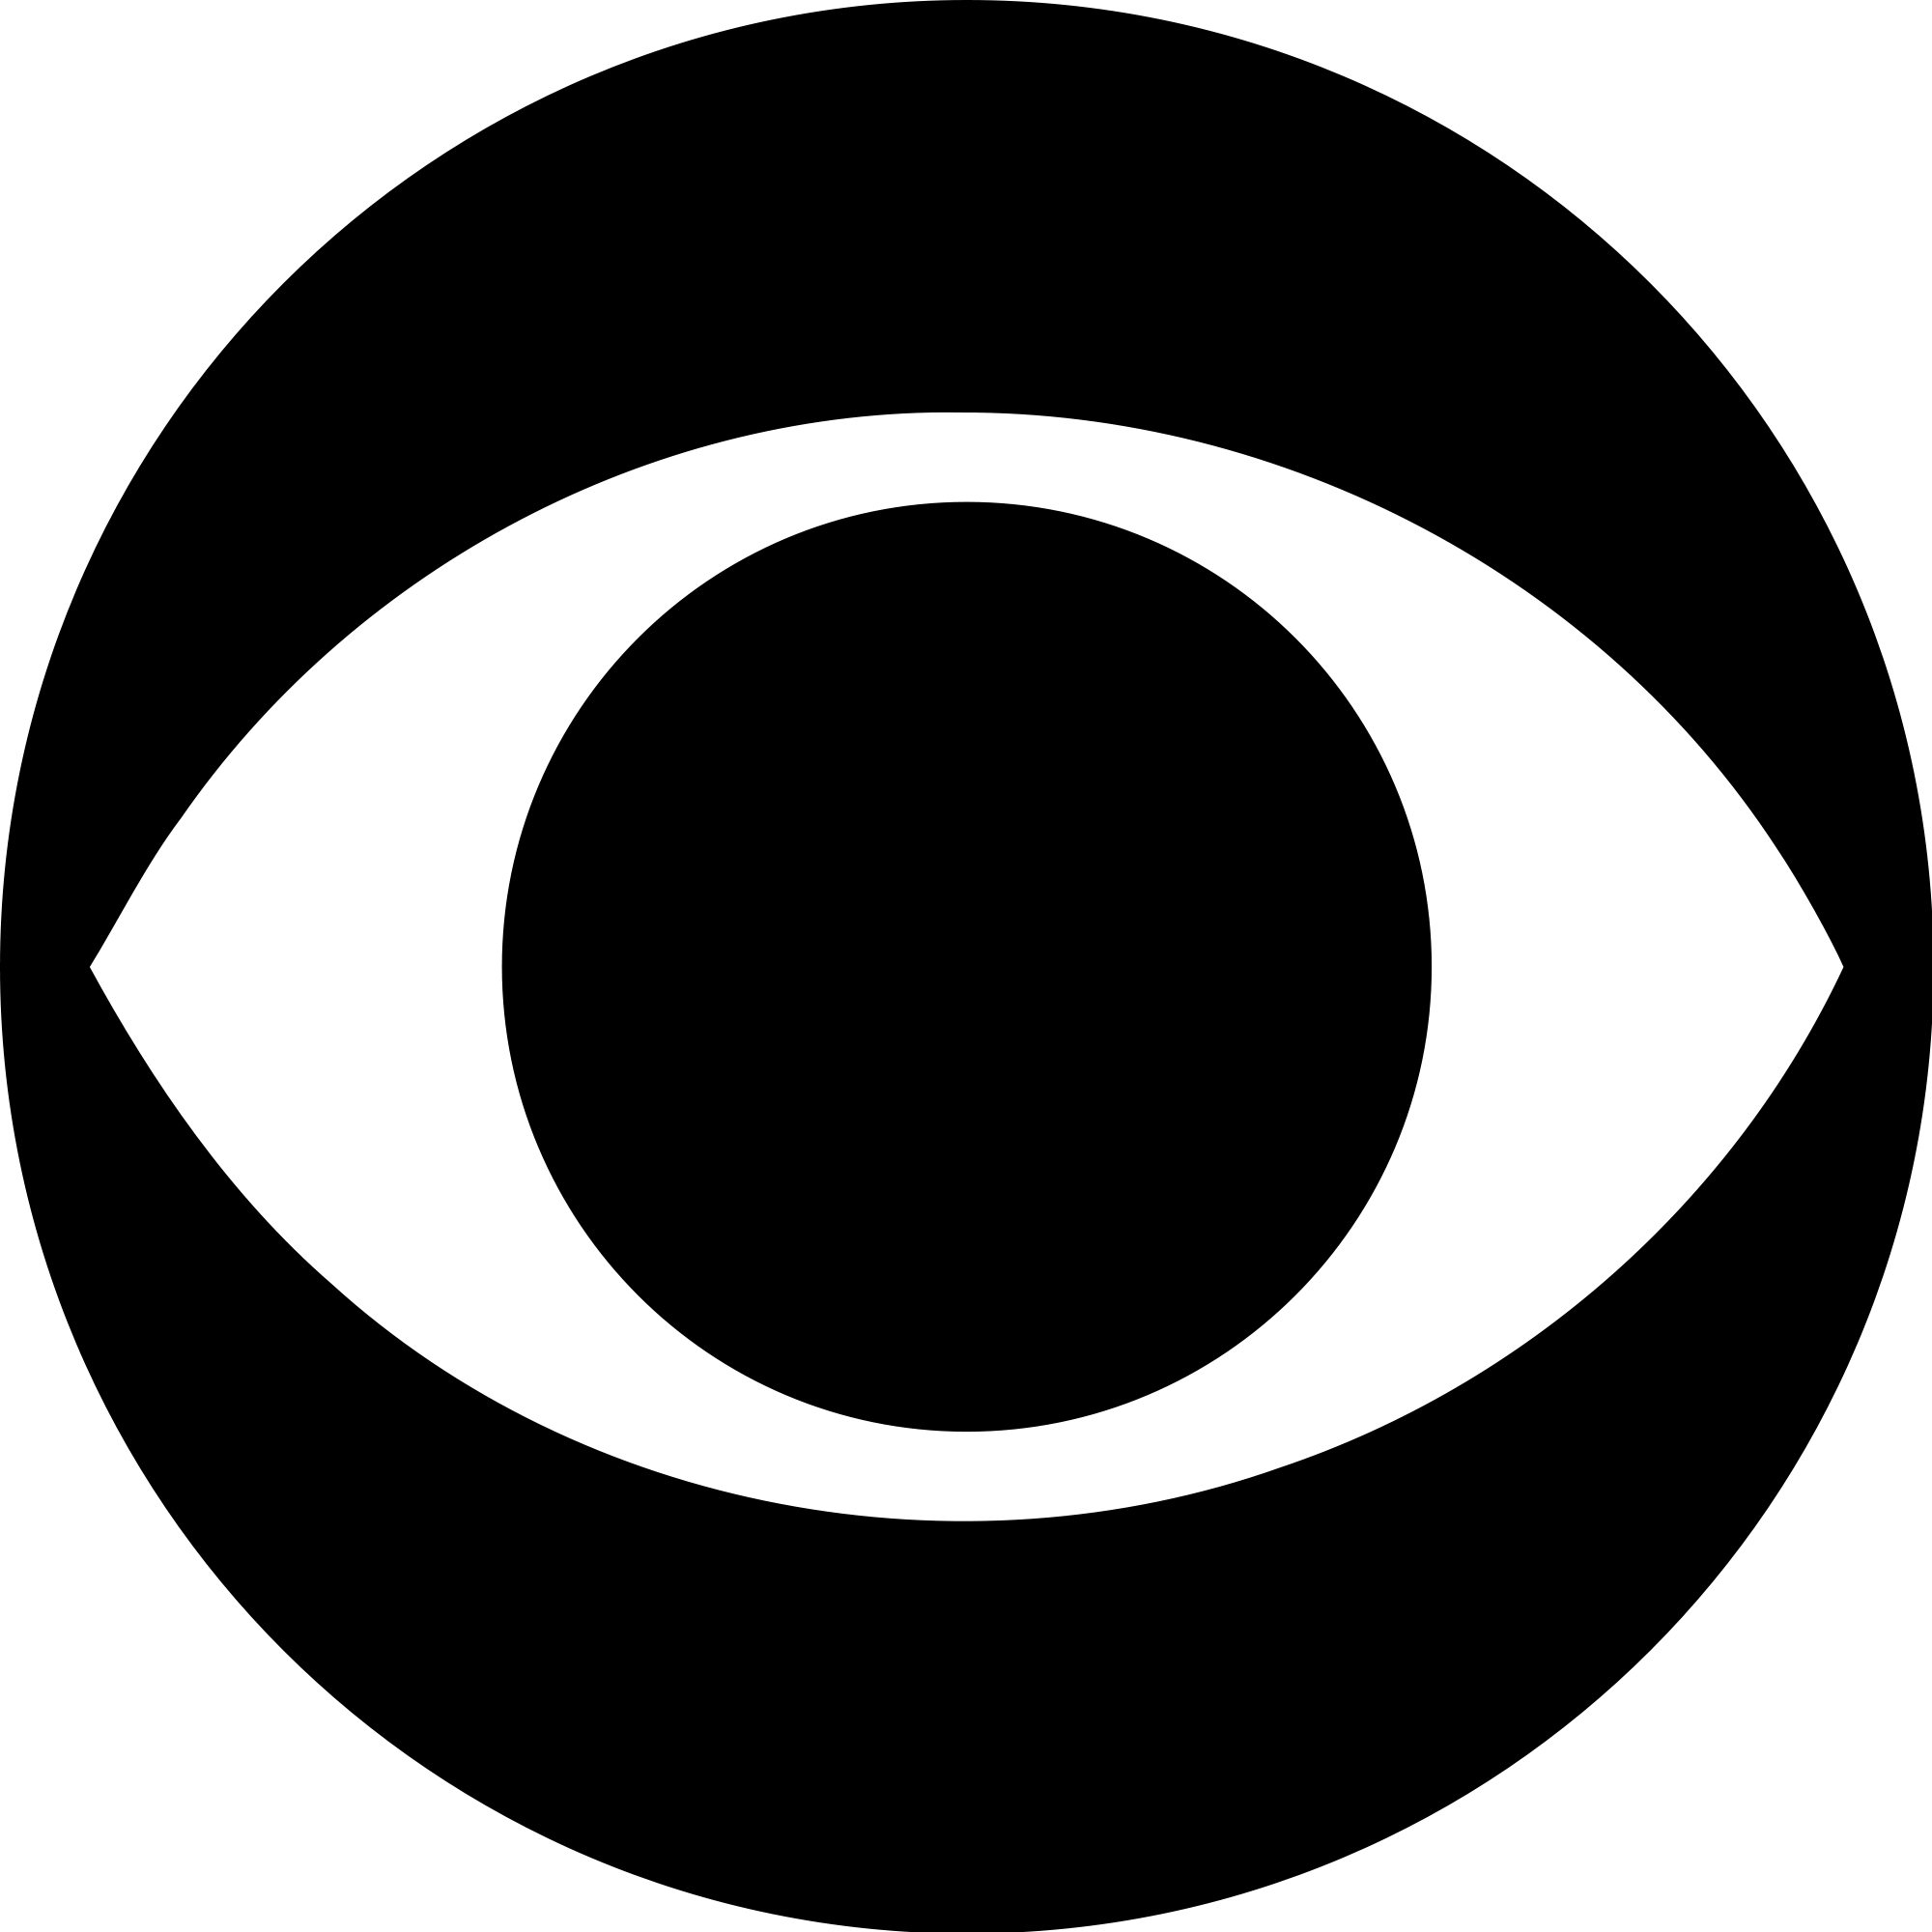 American Television Network Logo - Malachi Tyrus: The Movie/Television broadcast timeline | Tyrus Wikia ...